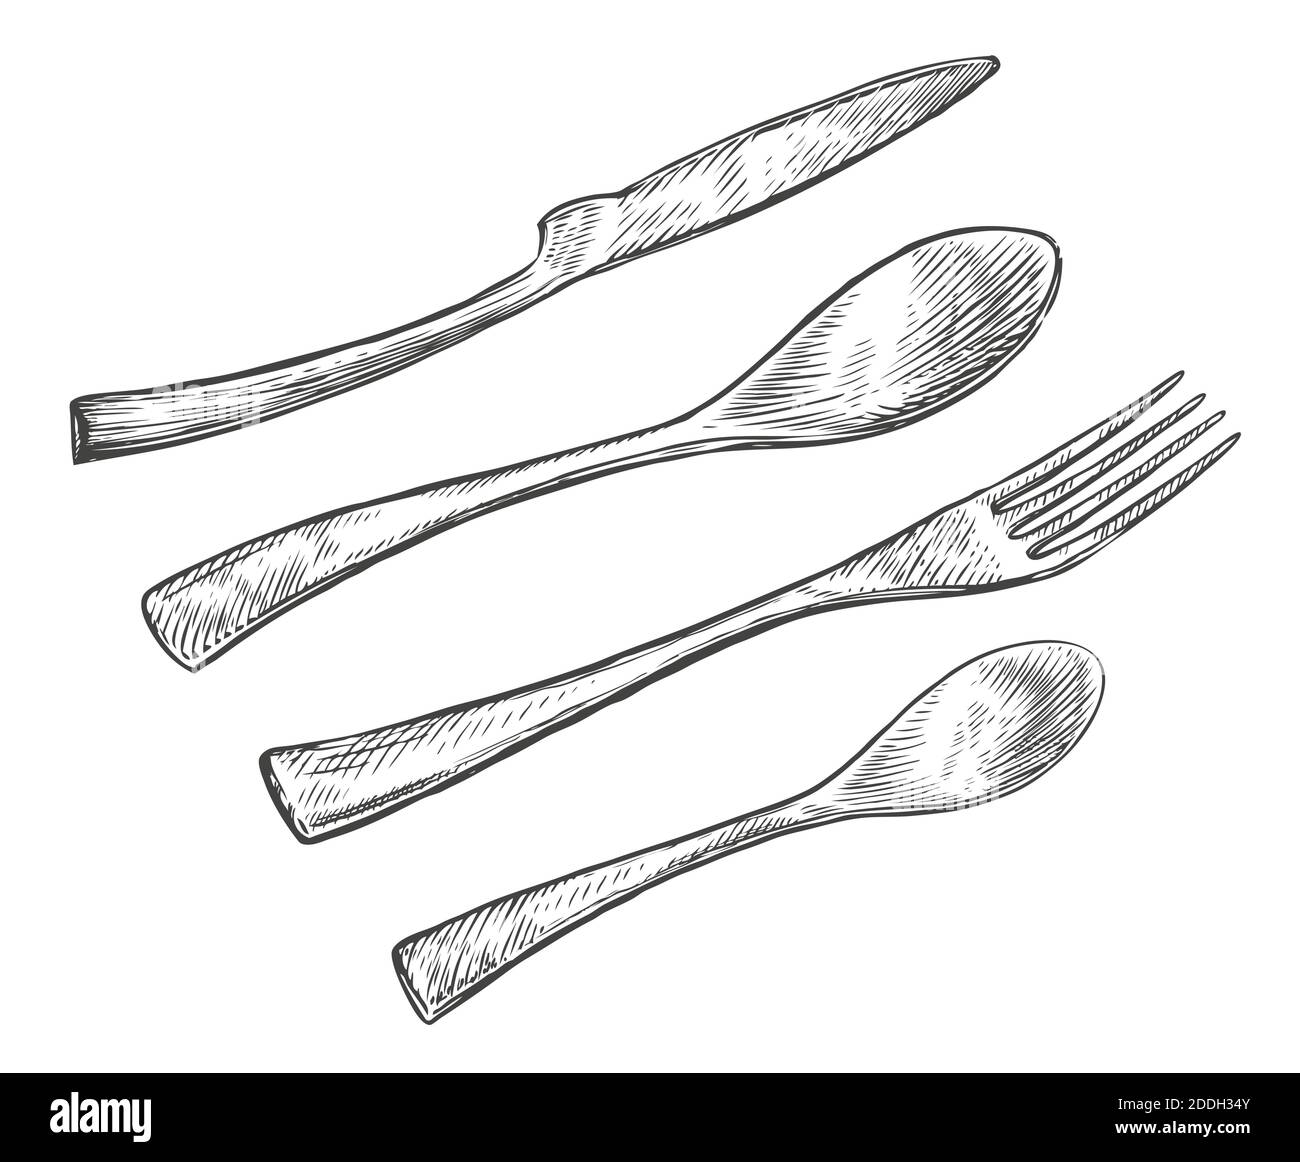 Cutlery, spoon and fork sketch. Food concept vintage vector illustration Stock Vector